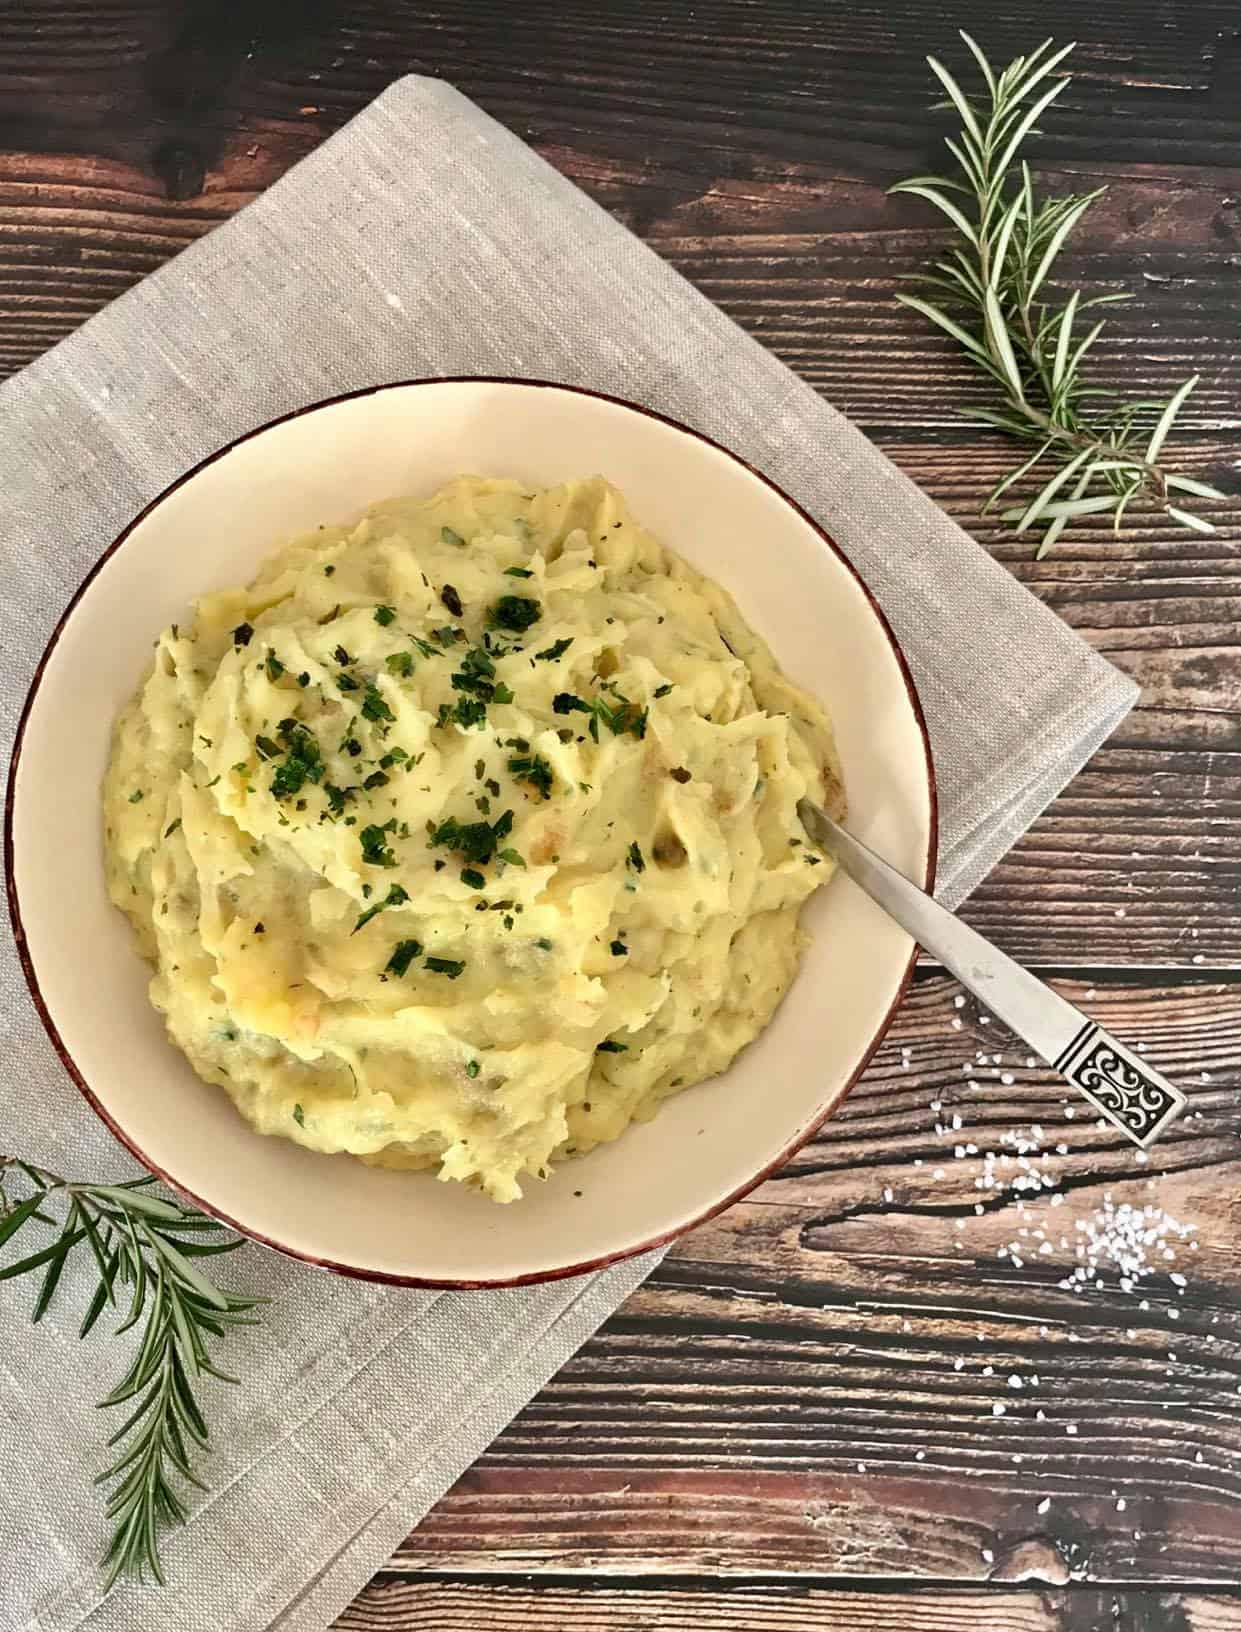 Vegan mashed potatoes without butter in a bowl.